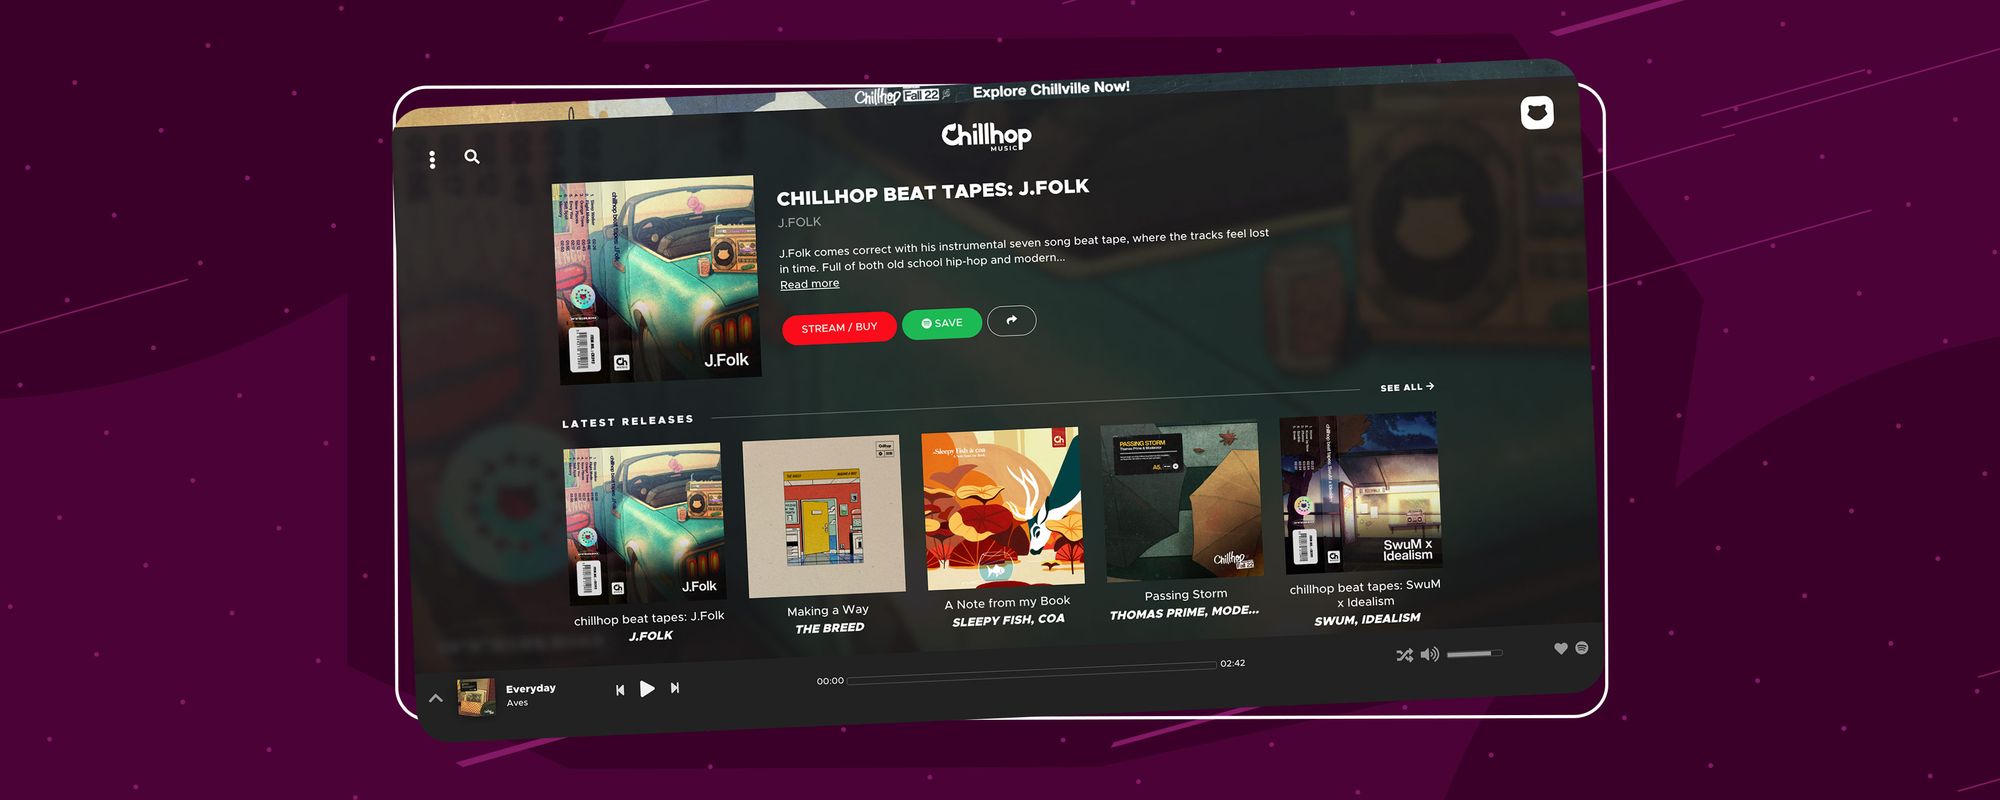 The Chillhop Music homepage